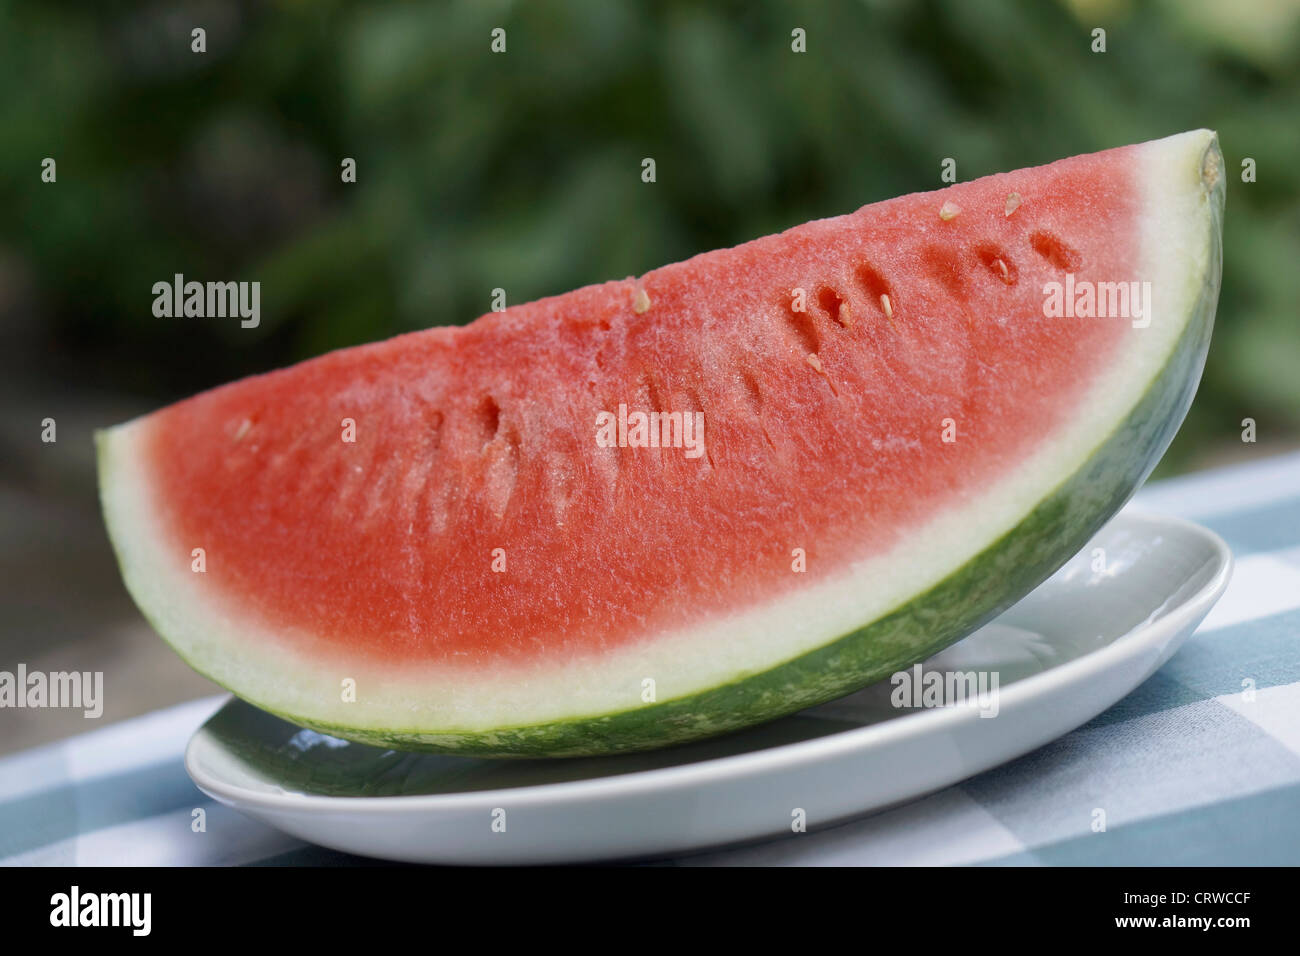 Watermelon Section, Segment on a plate Stock Photo